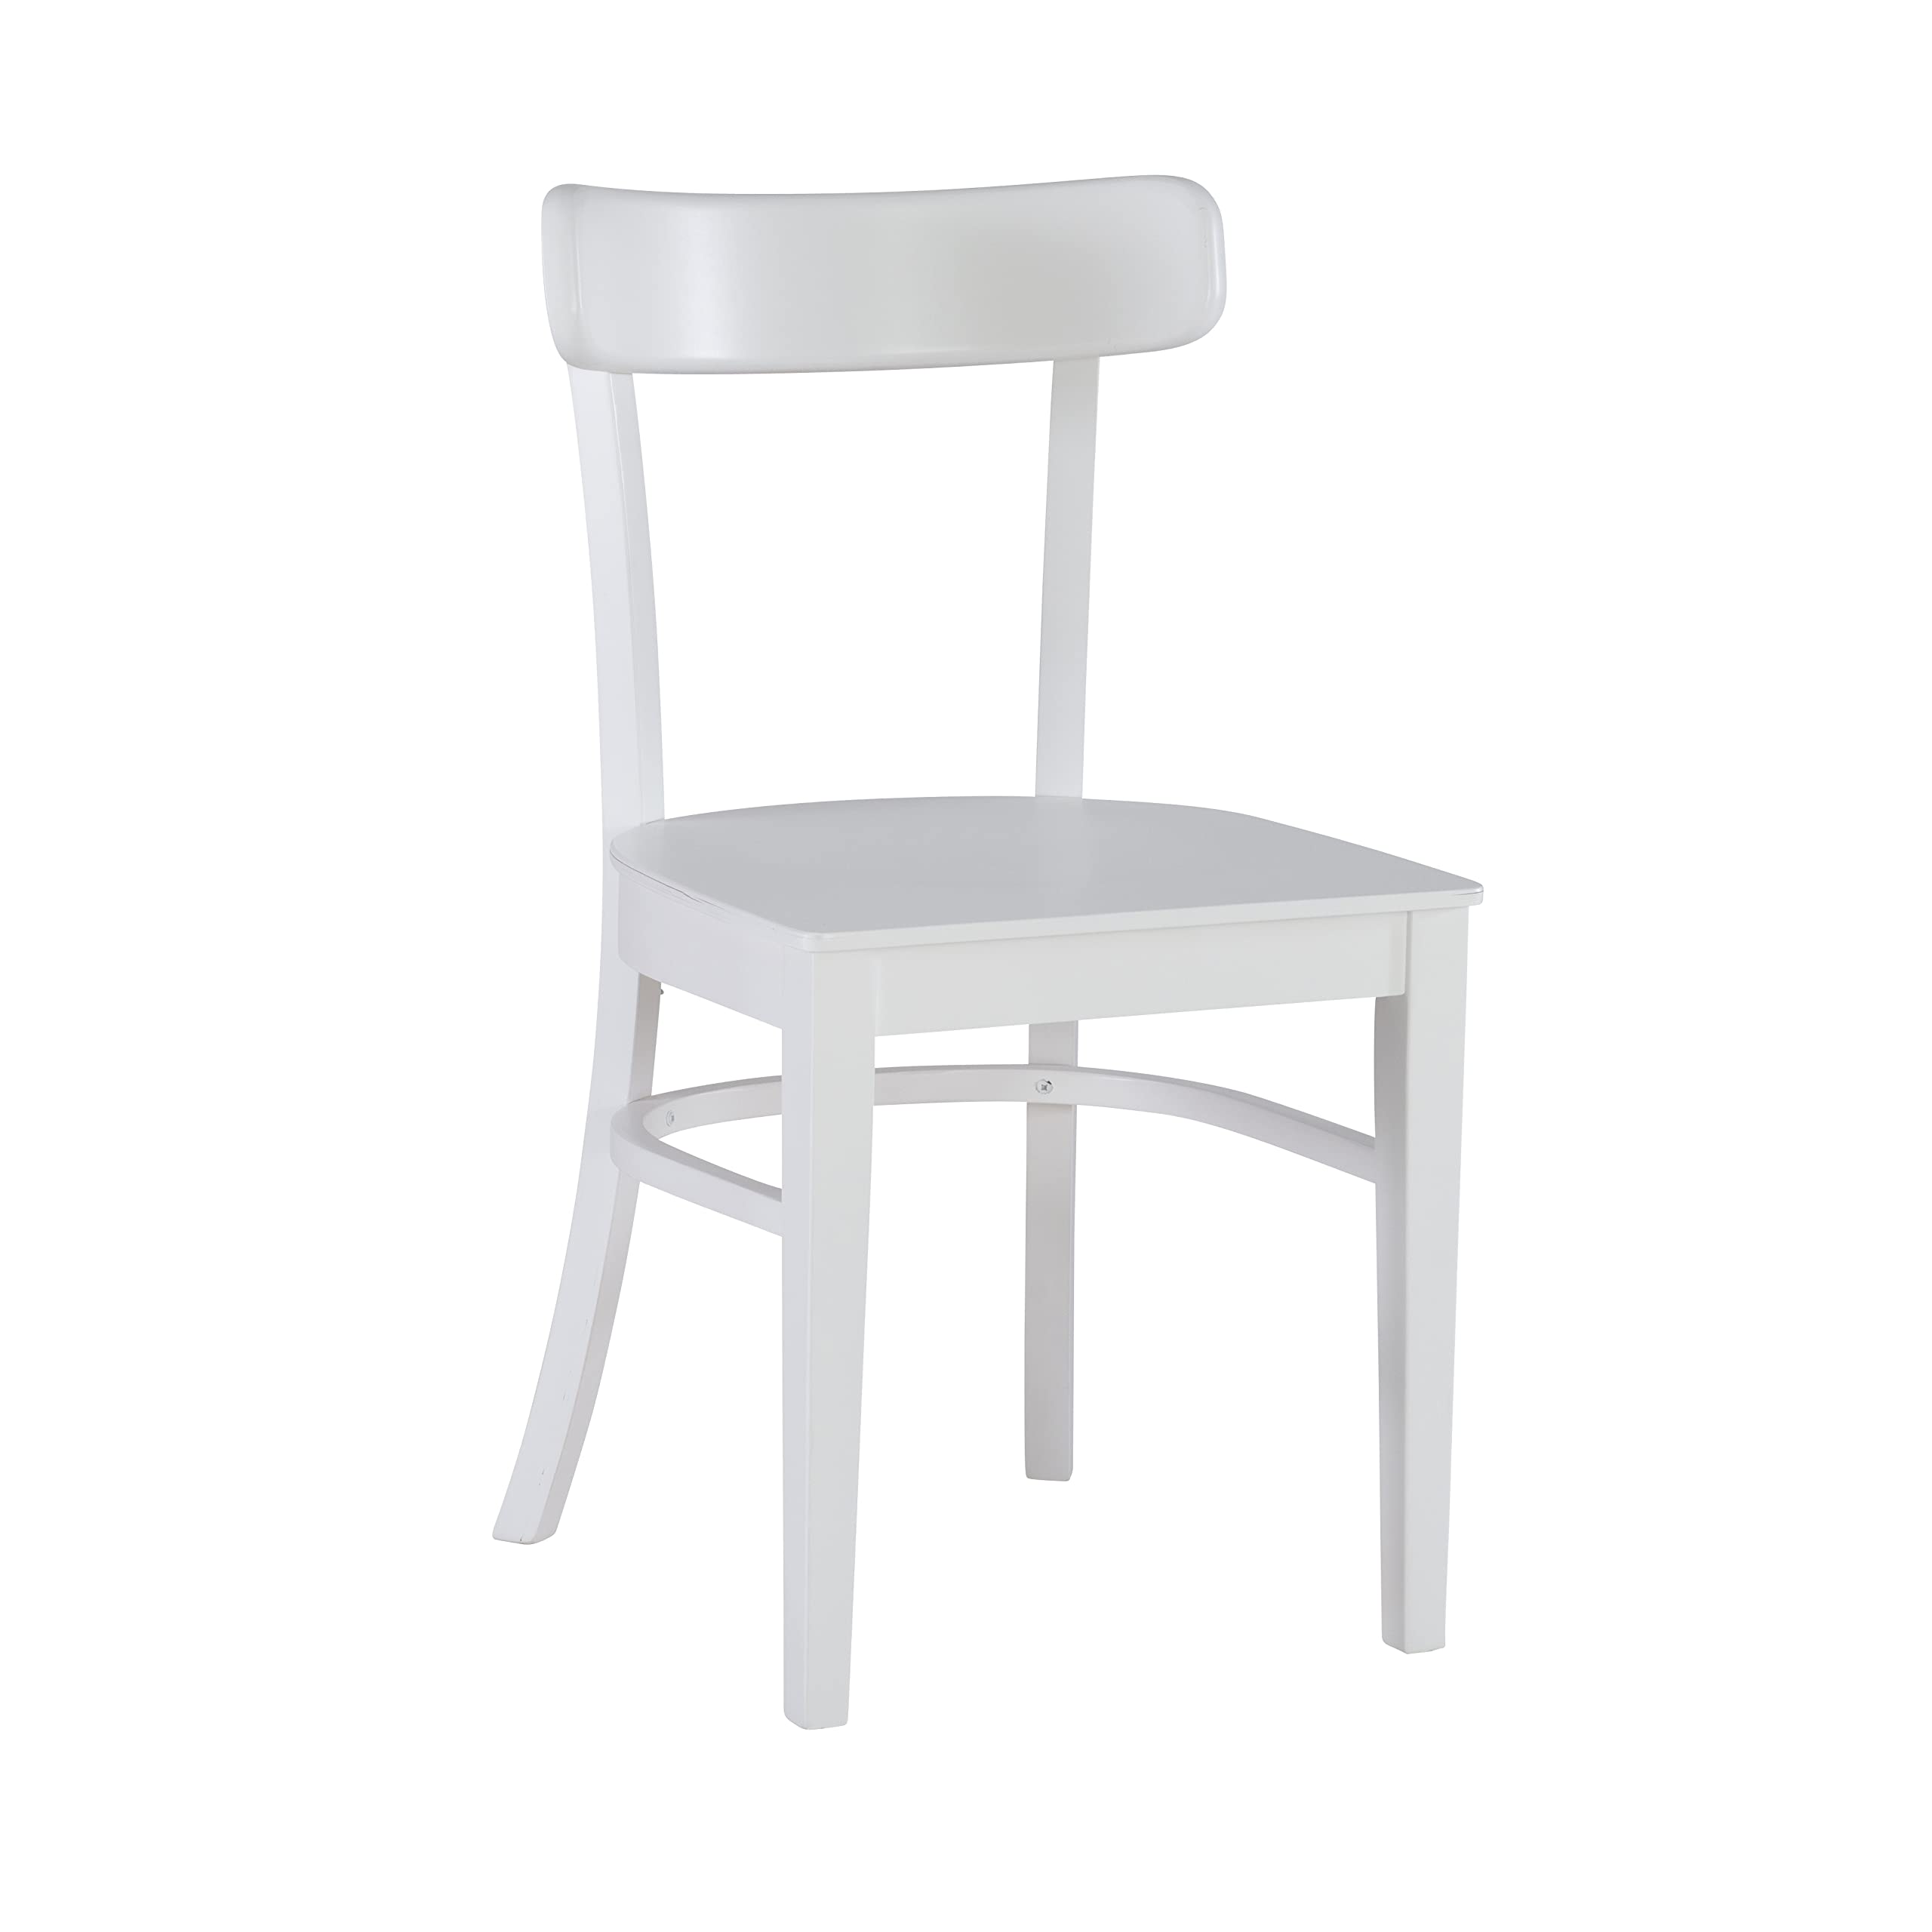 Linon Dayleen White Wooden Dining Chairs, Set of 2 Fully Assembled